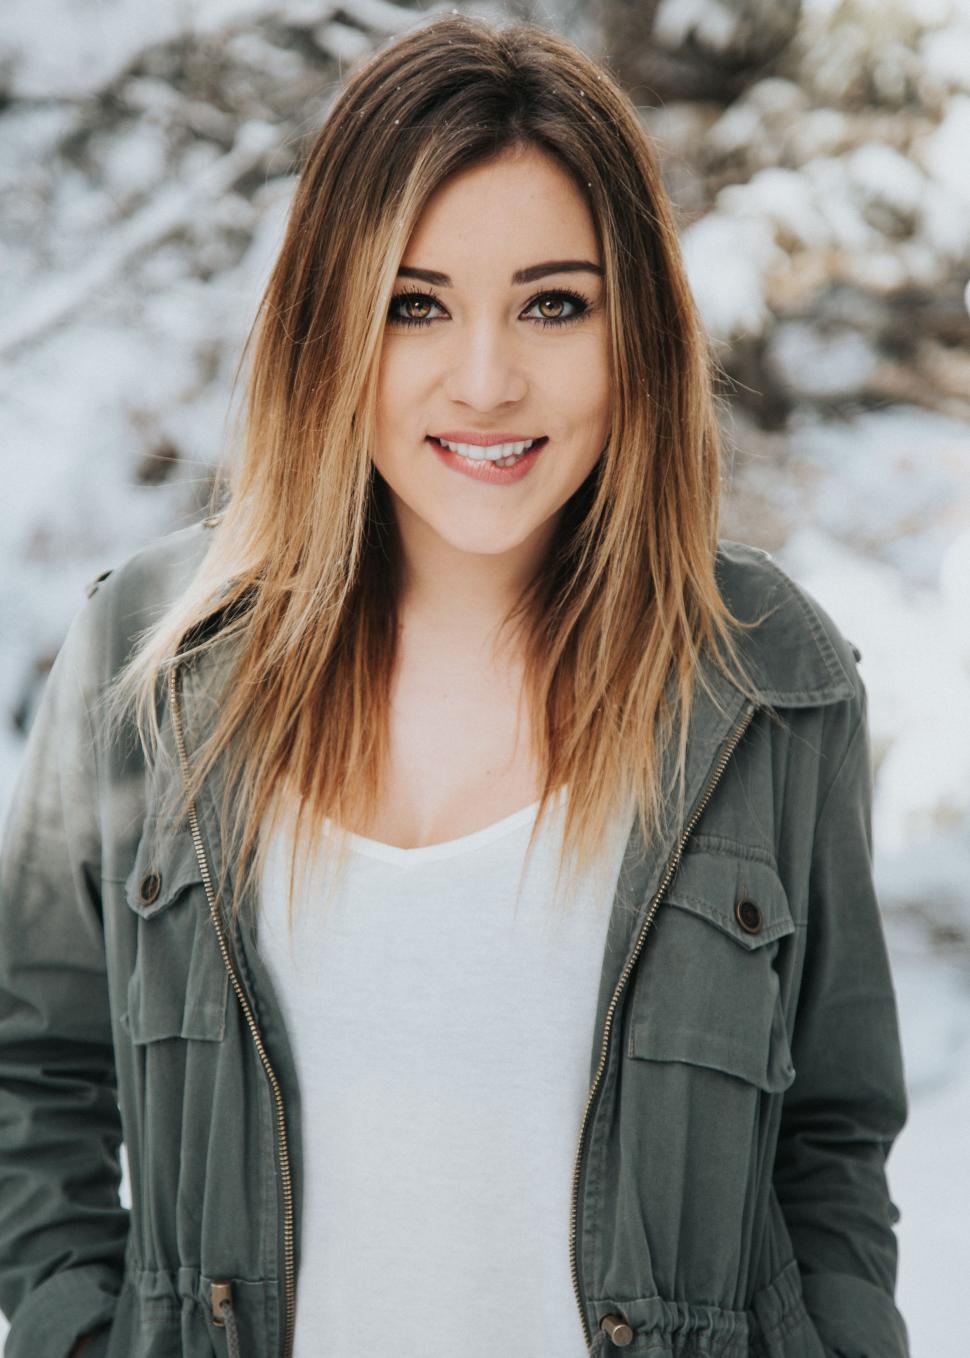 Free Image of Woman Smiling in Snow 